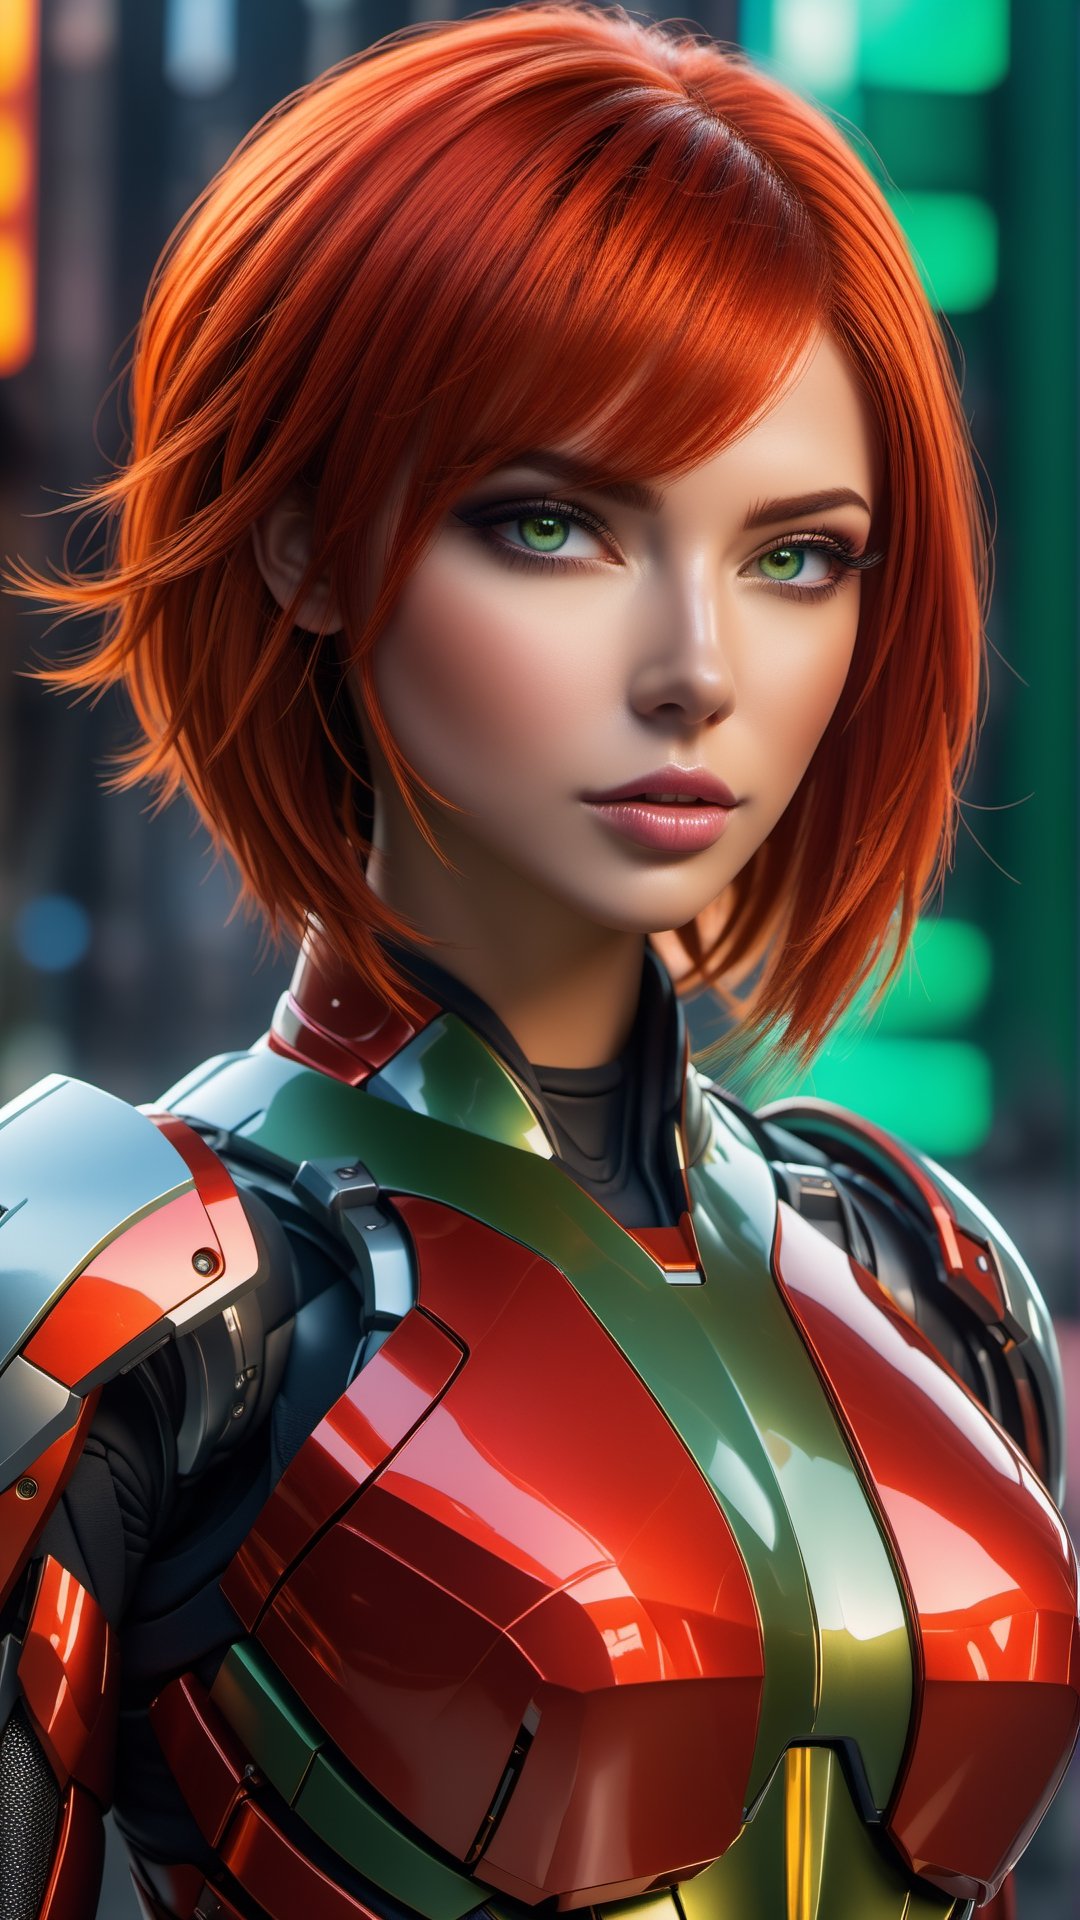 science fiction, 1woman, red short military hair curt, light red eyes, mecha armor sci-fi bodysuits green_platinium color, high-tech cybernetic arms and legs, hig-tech helmet with visor, imposing bust protective armor, full body, epic city futuristic_tech background, neotech,

PNG image format, sharp lines and borders, solid blocks of colors, over 300ppp dots per inch, 32k ultra high definition, 530MP, Fujifilm XT3, cinematographic, (photorealistic:1.6), 4D, High definition RAW color professional photos, photo, masterpiece, realistic, ProRAW, realism, photorealism, high contrast, digital art trending on Artstation ultra high definition detailed realistic, detailed, skin texture, hyper detailed, realistic skin texture, facial features, armature, best quality, ultra high res, high resolution, detailed, raw photo, sharp re, lens rich colors hyper realistic lifelike texture dramatic lighting unrealengine trending, ultra sharp, pictorial technique, (sharpness, definition and photographic precision), (contrast, depth and harmonious light details), (features, proportions, colors and textures at their highest degree of realism), (blur background, clean and uncluttered visual aesthetics, sense of depth and dimension, professional and polished look of the image), work of beauty and complexity. perfectly symmetrical body.

(aesthetic + beautiful + harmonic:1.5), (ultra detailed face, ultra detailed eyes, ultra detailed mouth, ultra detailed body, ultra detailed hands, ultra detailed clothes, ultra detailed background, ultra detailed scenery:1.5),

3d_toon_xl:0.8, JuggerCineXL2:0.9, detail_master_XL:0.9, detailmaster2.0:0.9, perfecteyes-000007:1.3,more detail XL